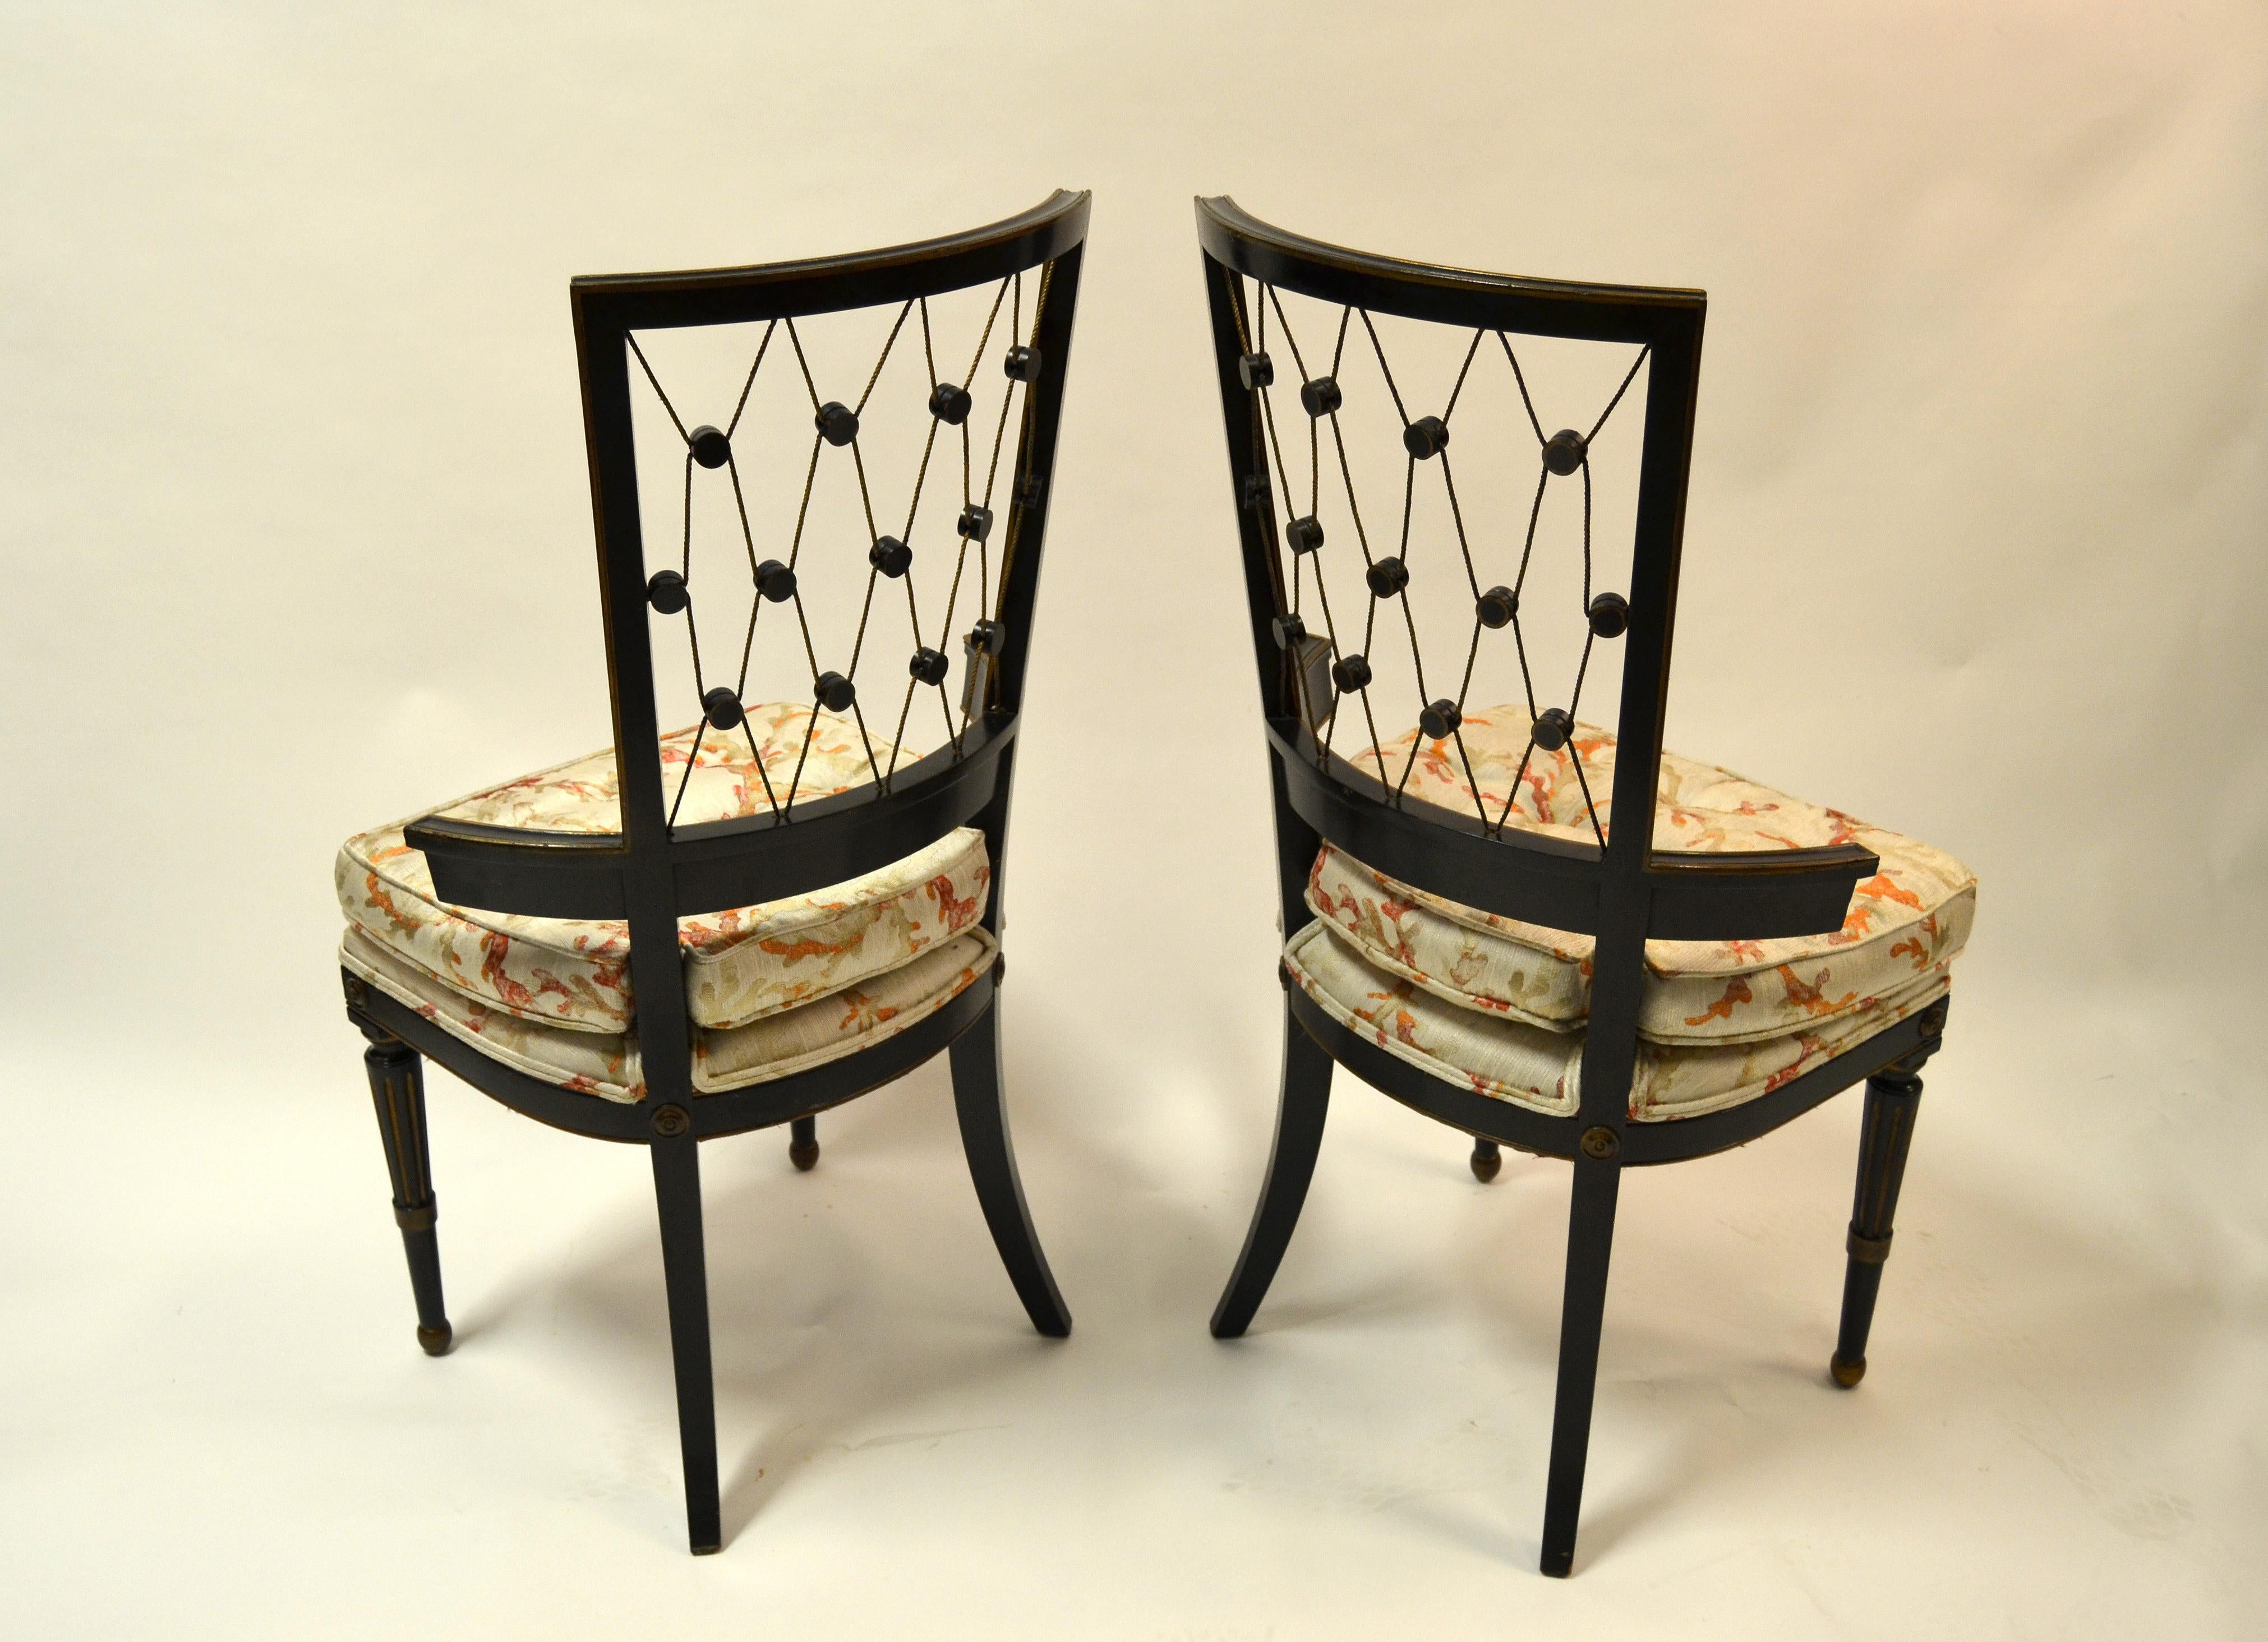 1940s American Side Chairs Intricate Diamond Pattern Back Black and Gold - Pair For Sale 1